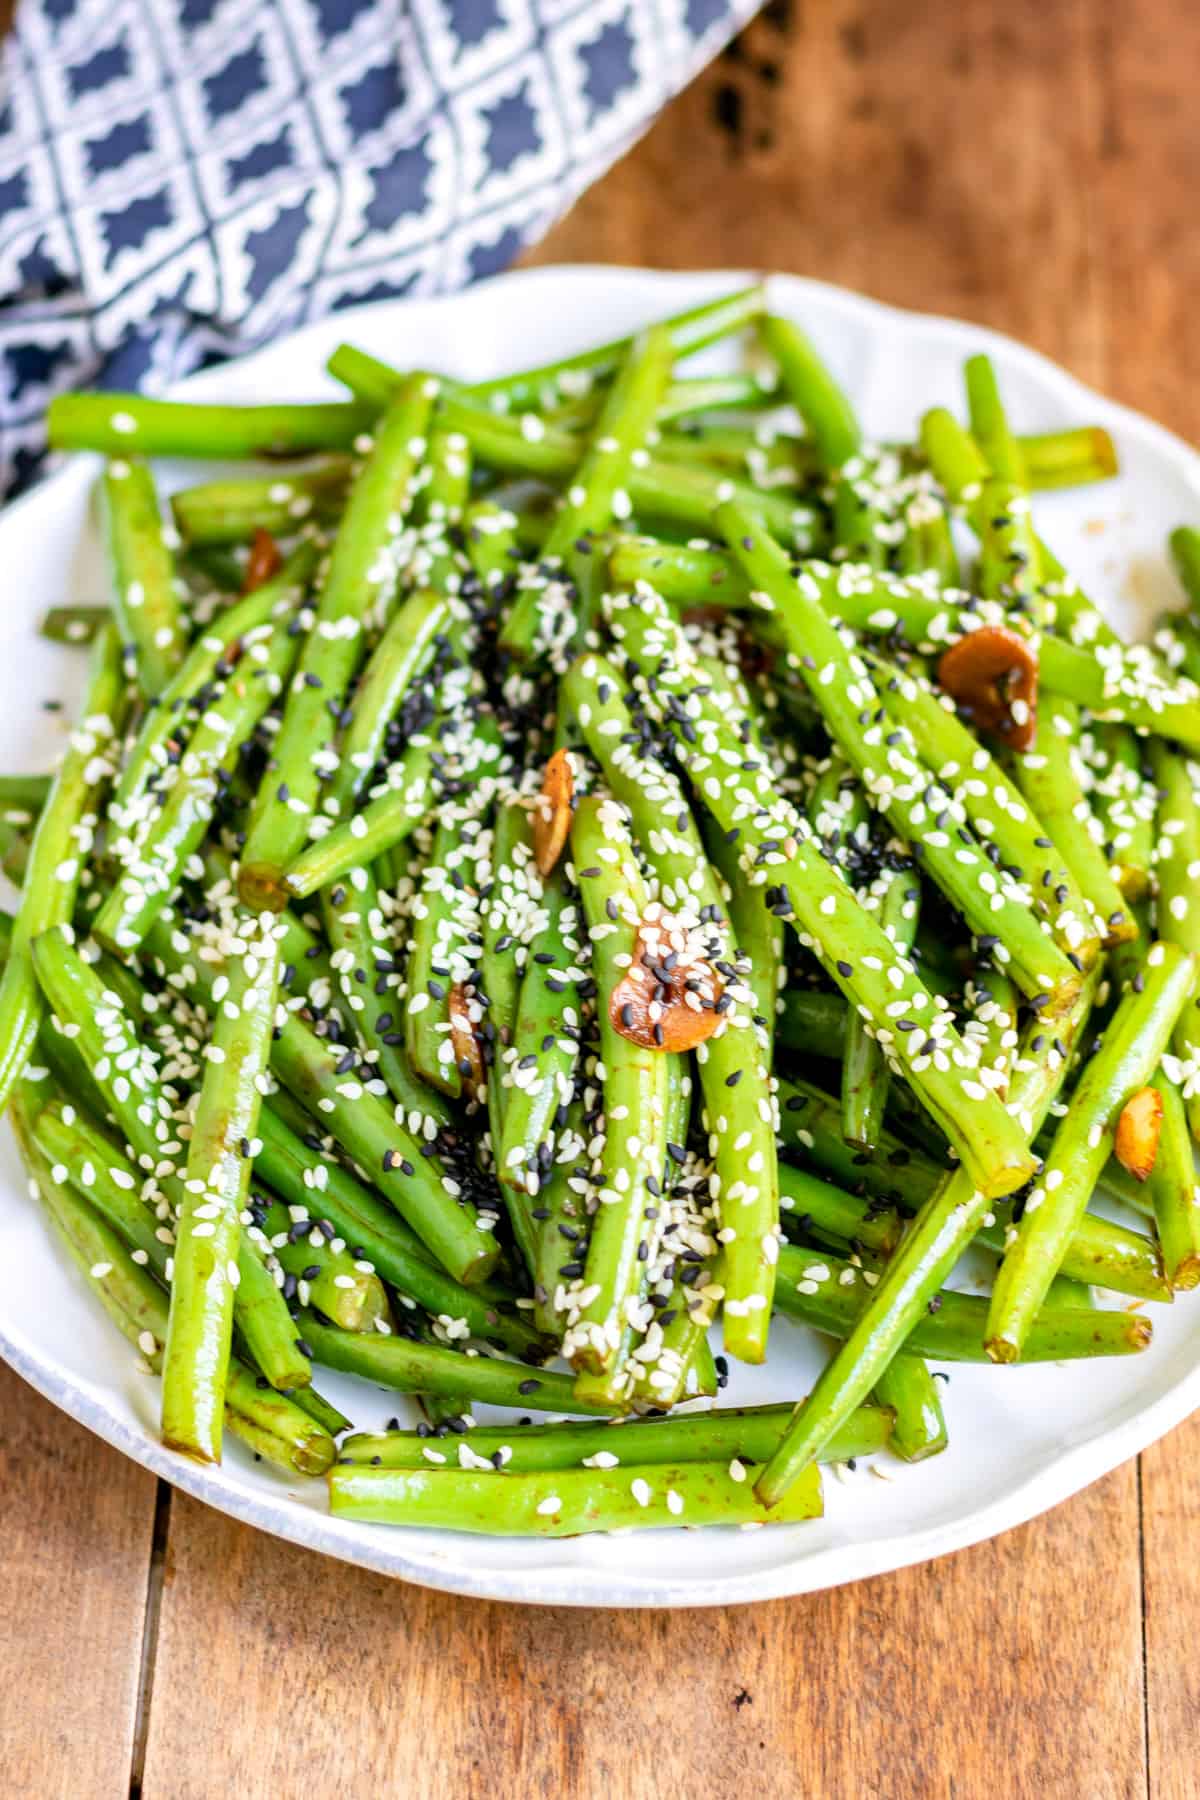 Table with a serving dish of sesame green beans.